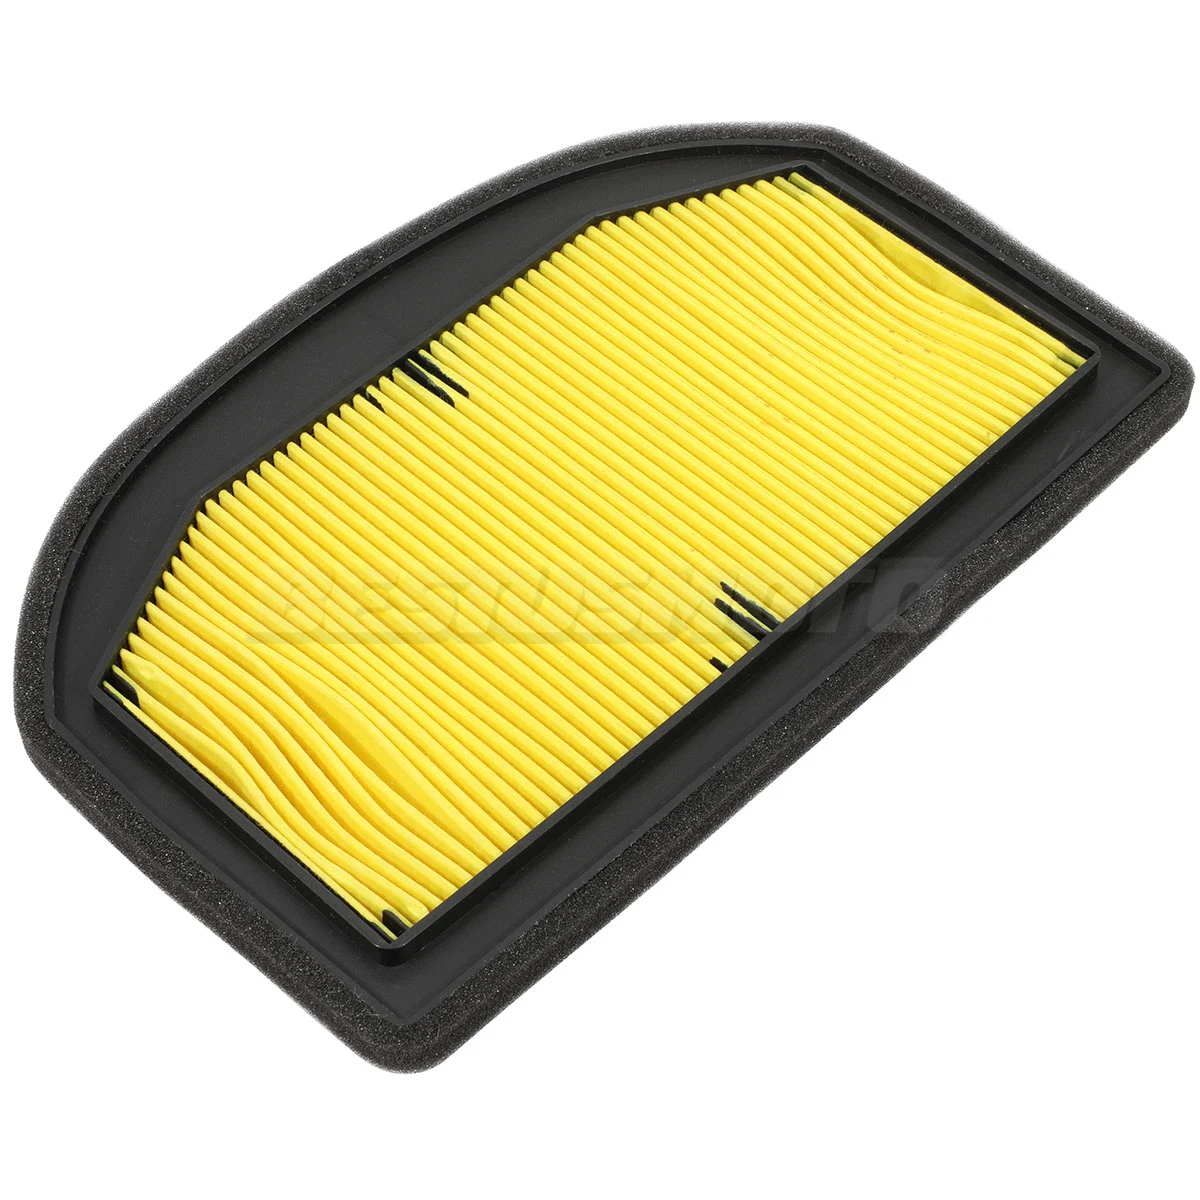 

Motorcycle Air Filter For Triumph Tiger 1200 Explorer XCA XCX XR XRT XRX 2012 2013 2014 2015 2016 2017 2018 2019 2020 2021